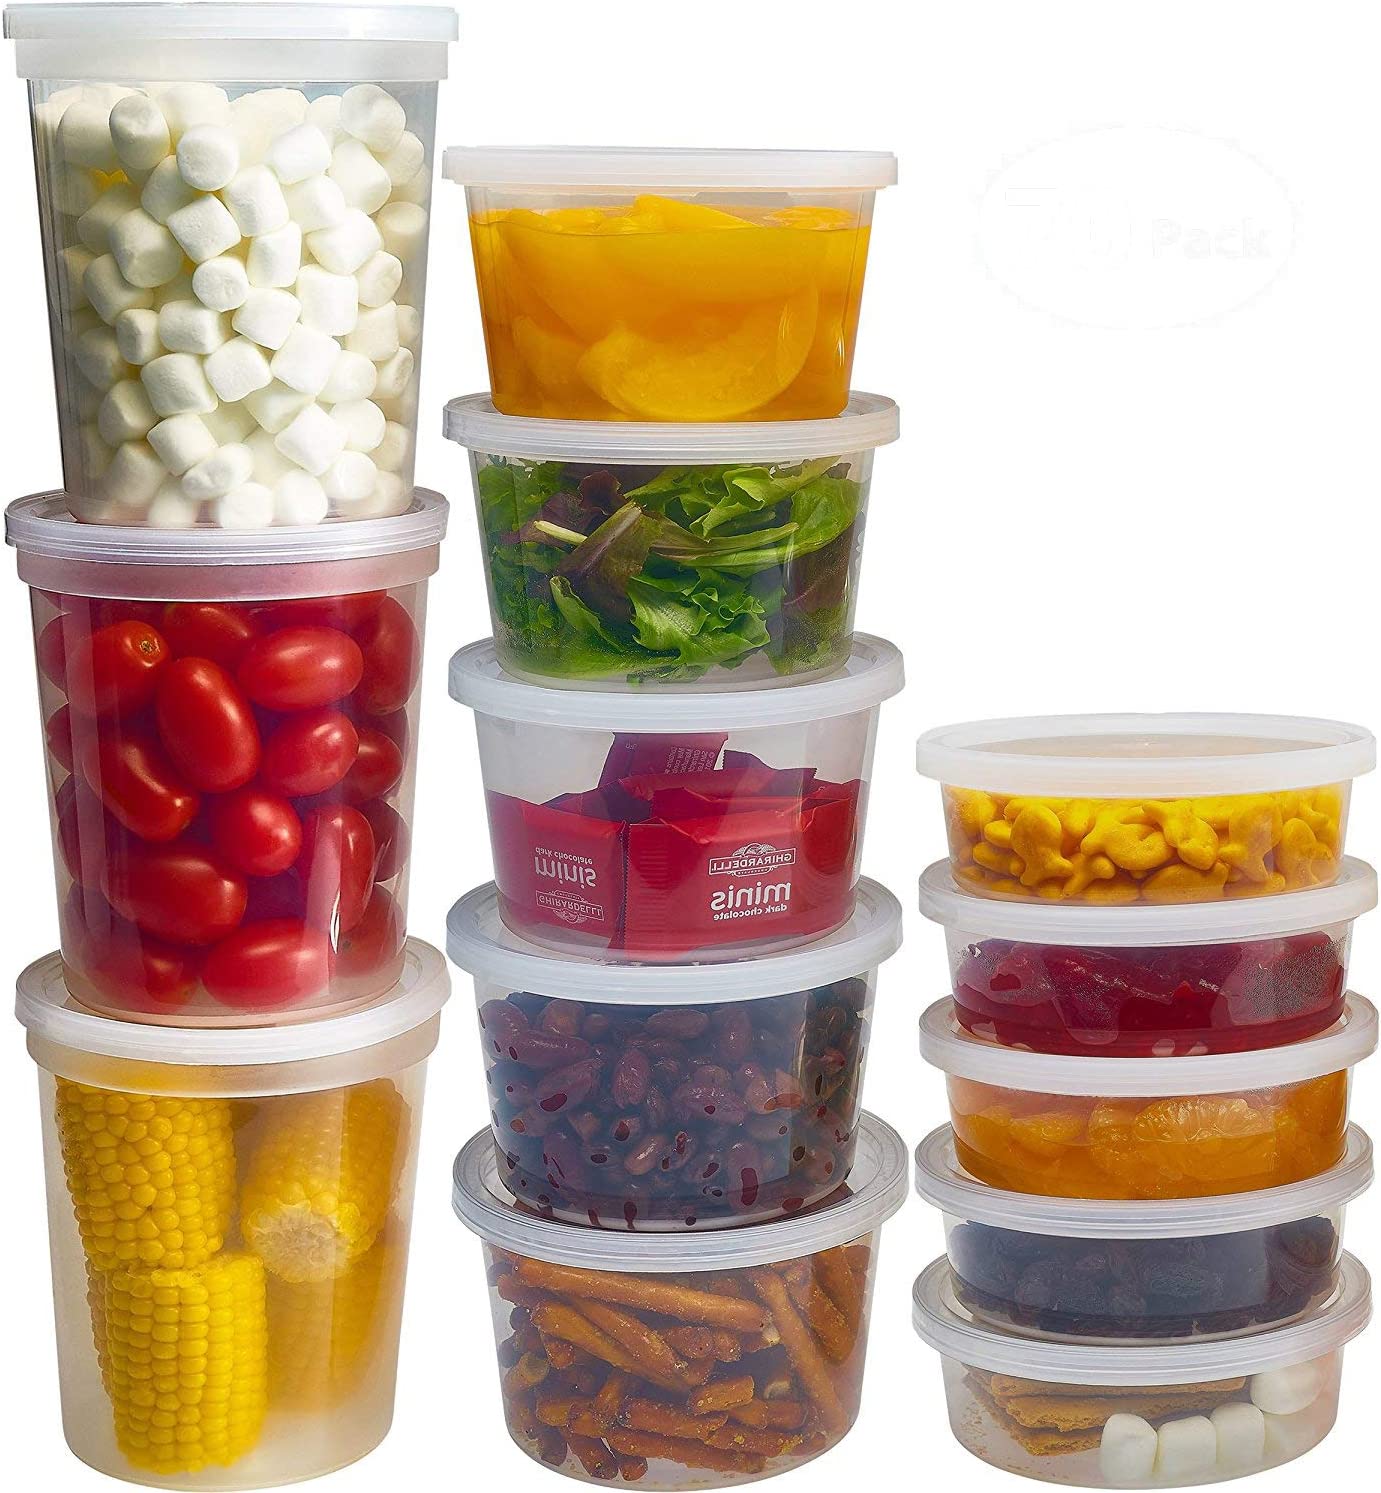 6 Best Food Storage Containers That Resist Bacteria